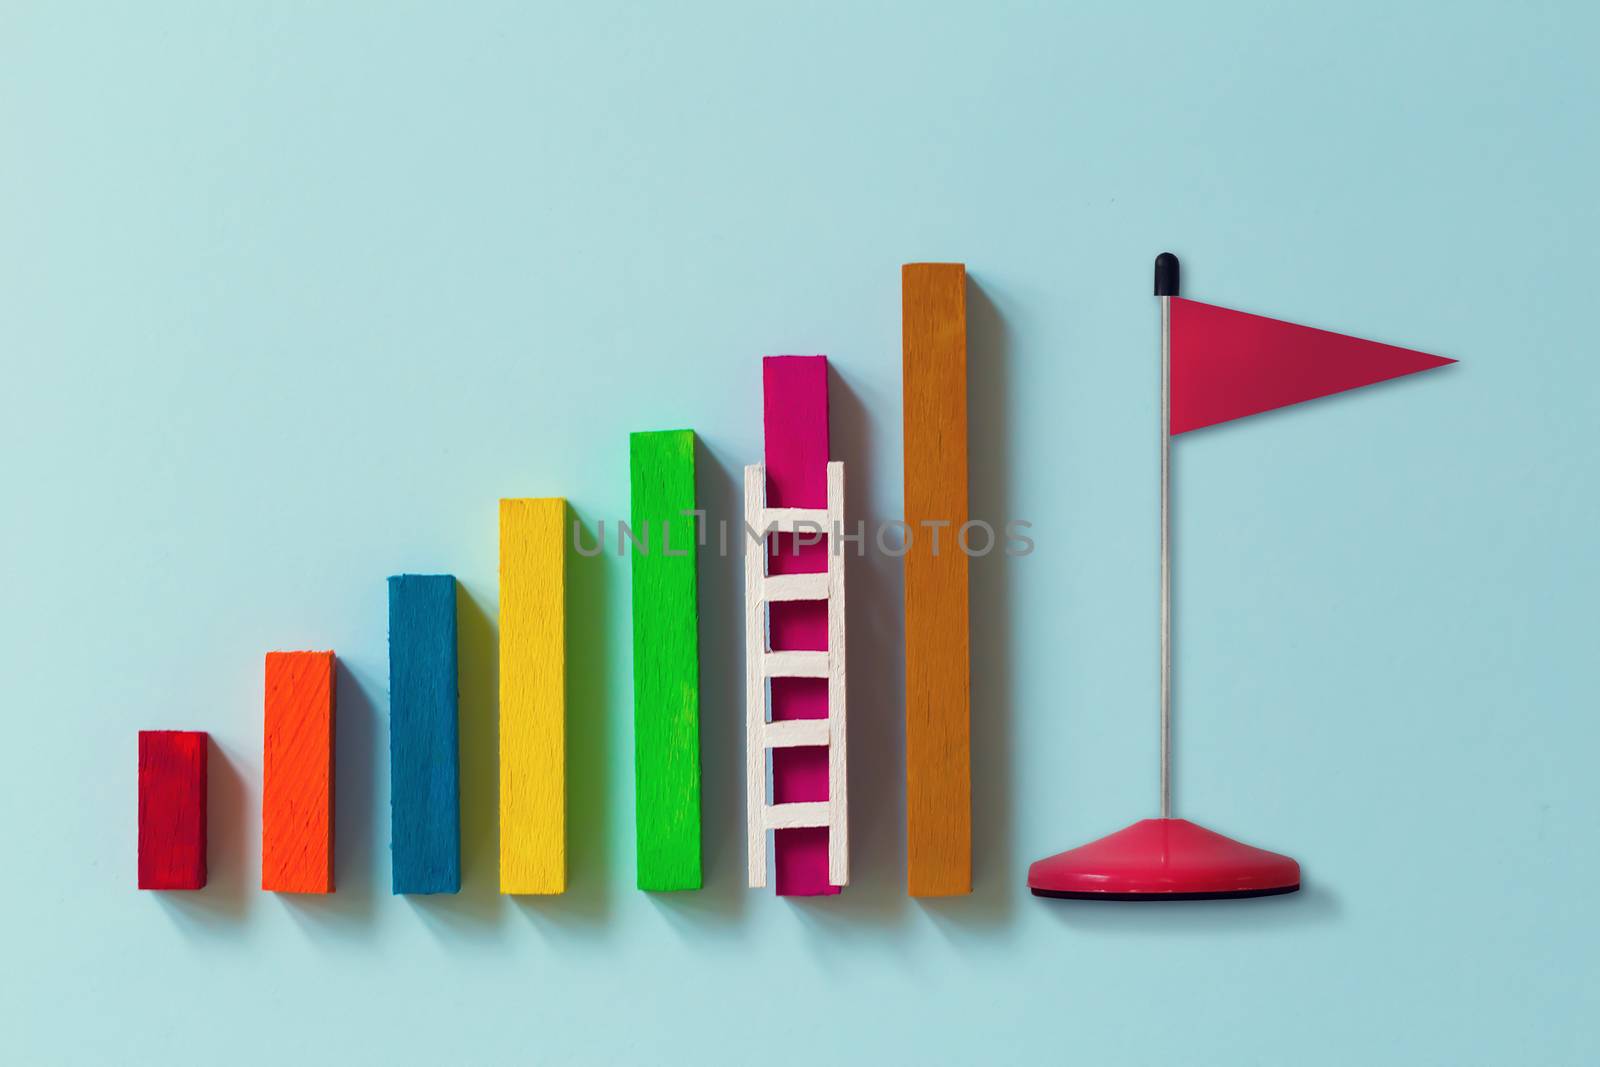 Arrange rising bar graph with stair and red flag. Concept of analysing information / Business concept growth success process: depicts the increment in annual financial budget or revenues of long term by setila